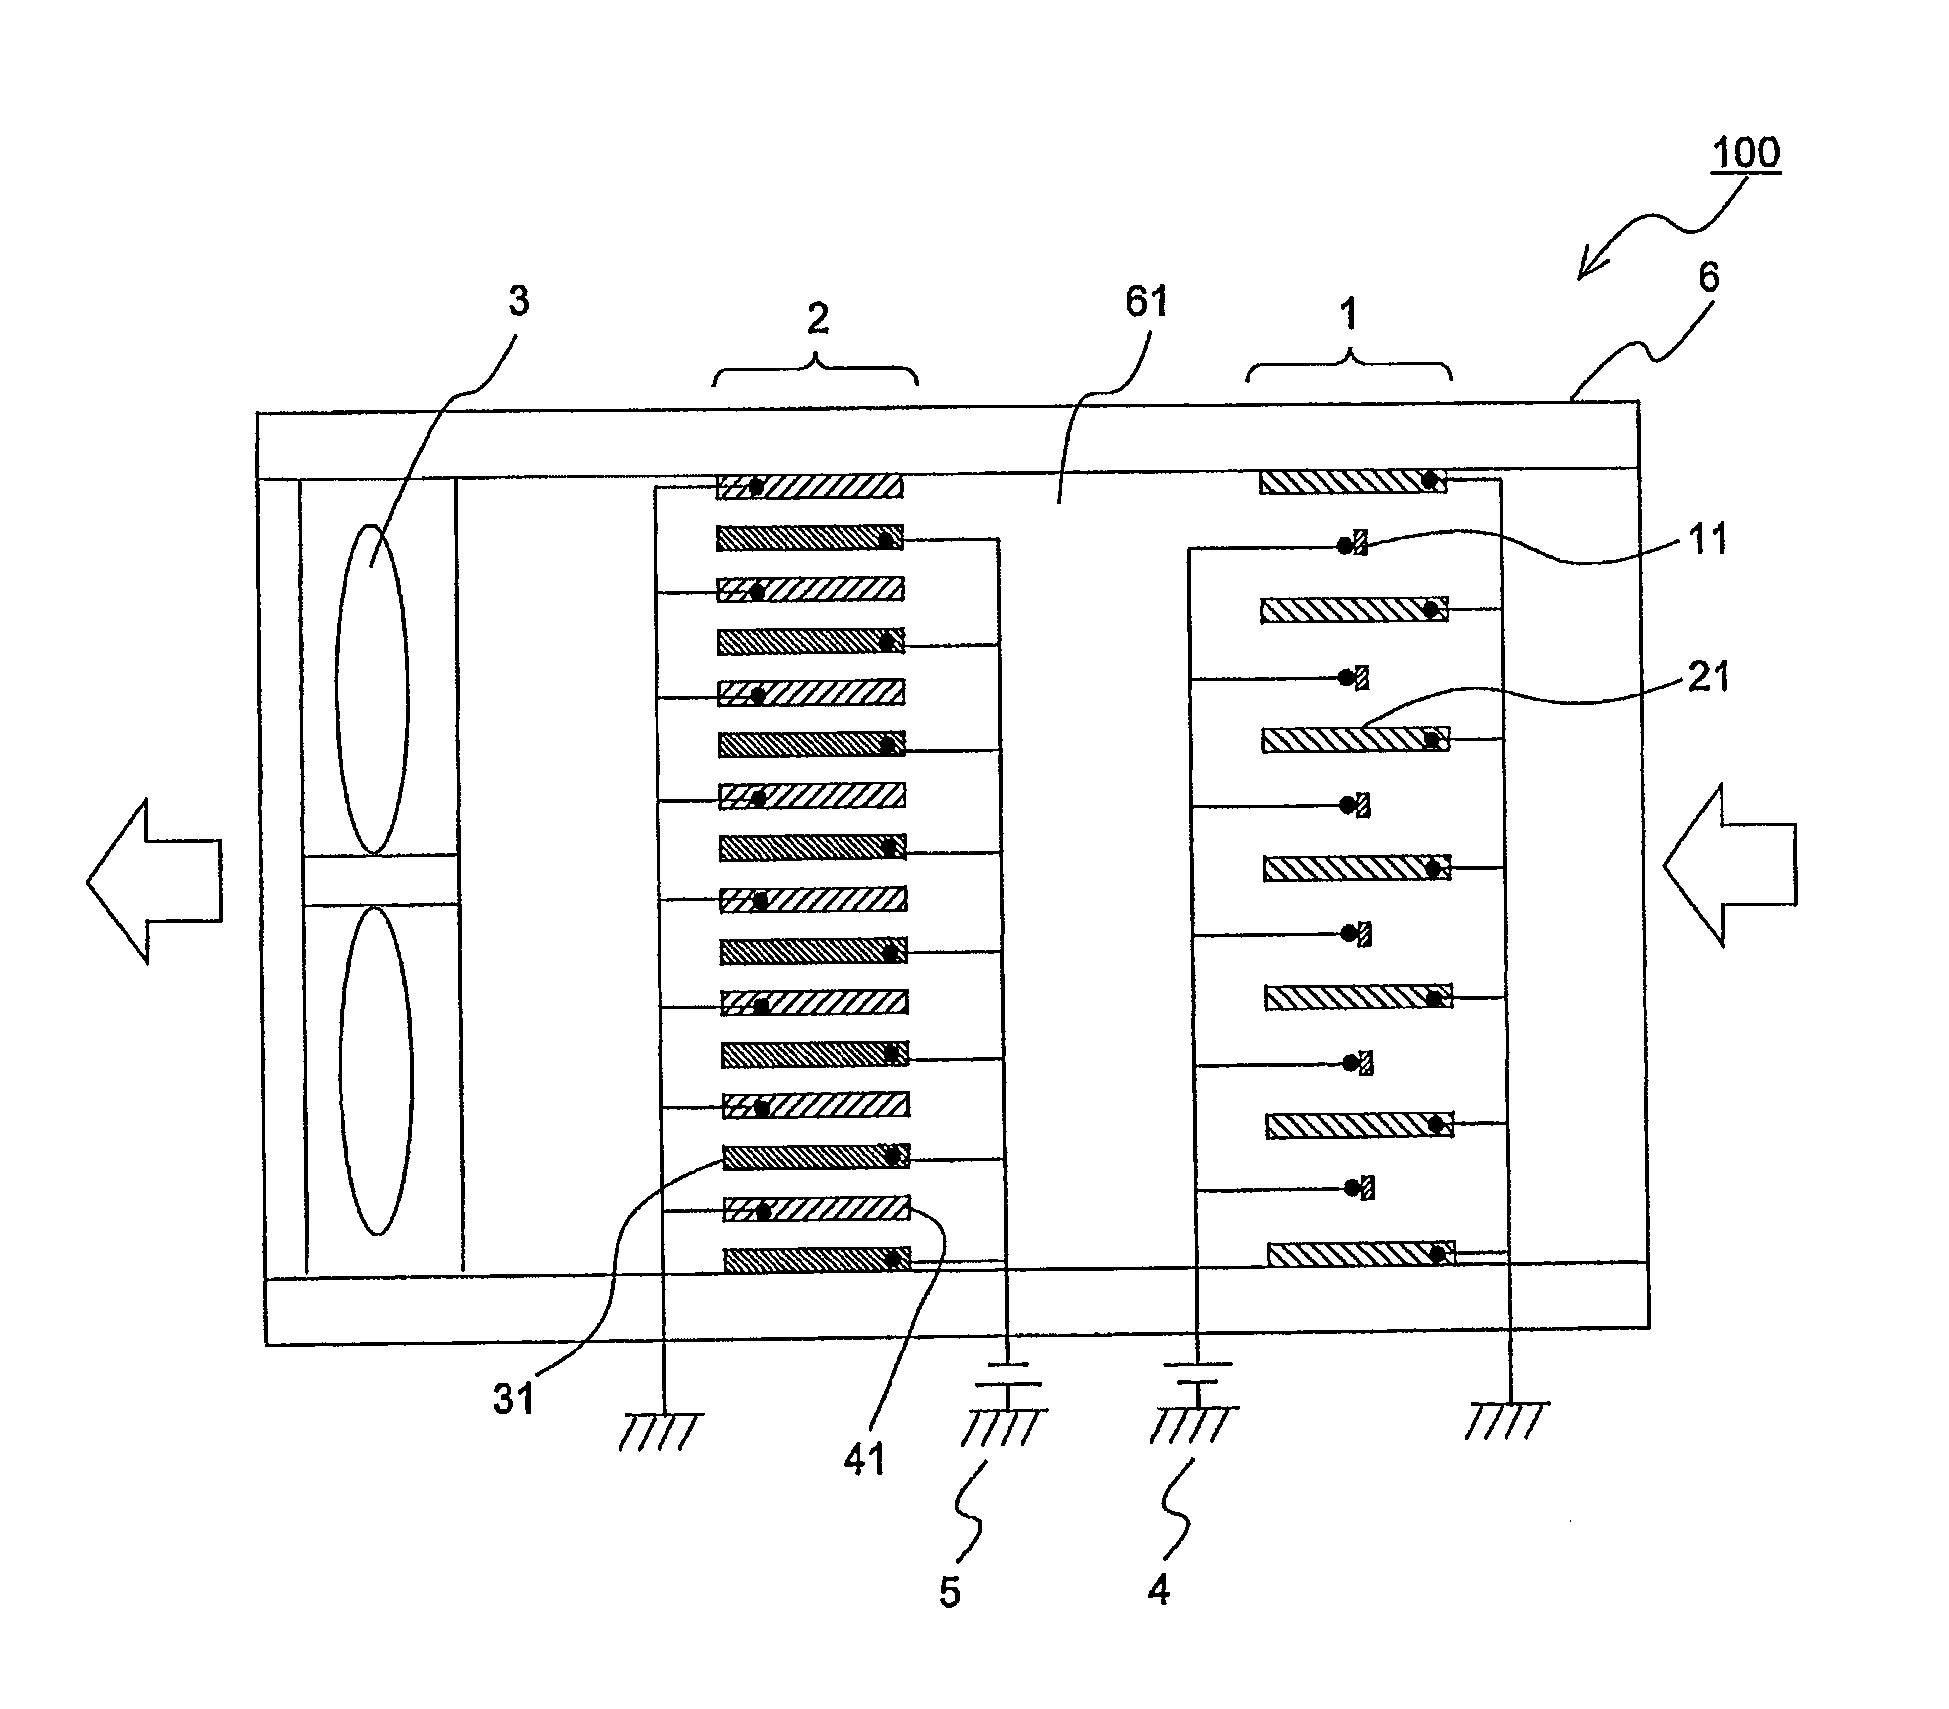 Corona discharge device and air-conditioning apparatus